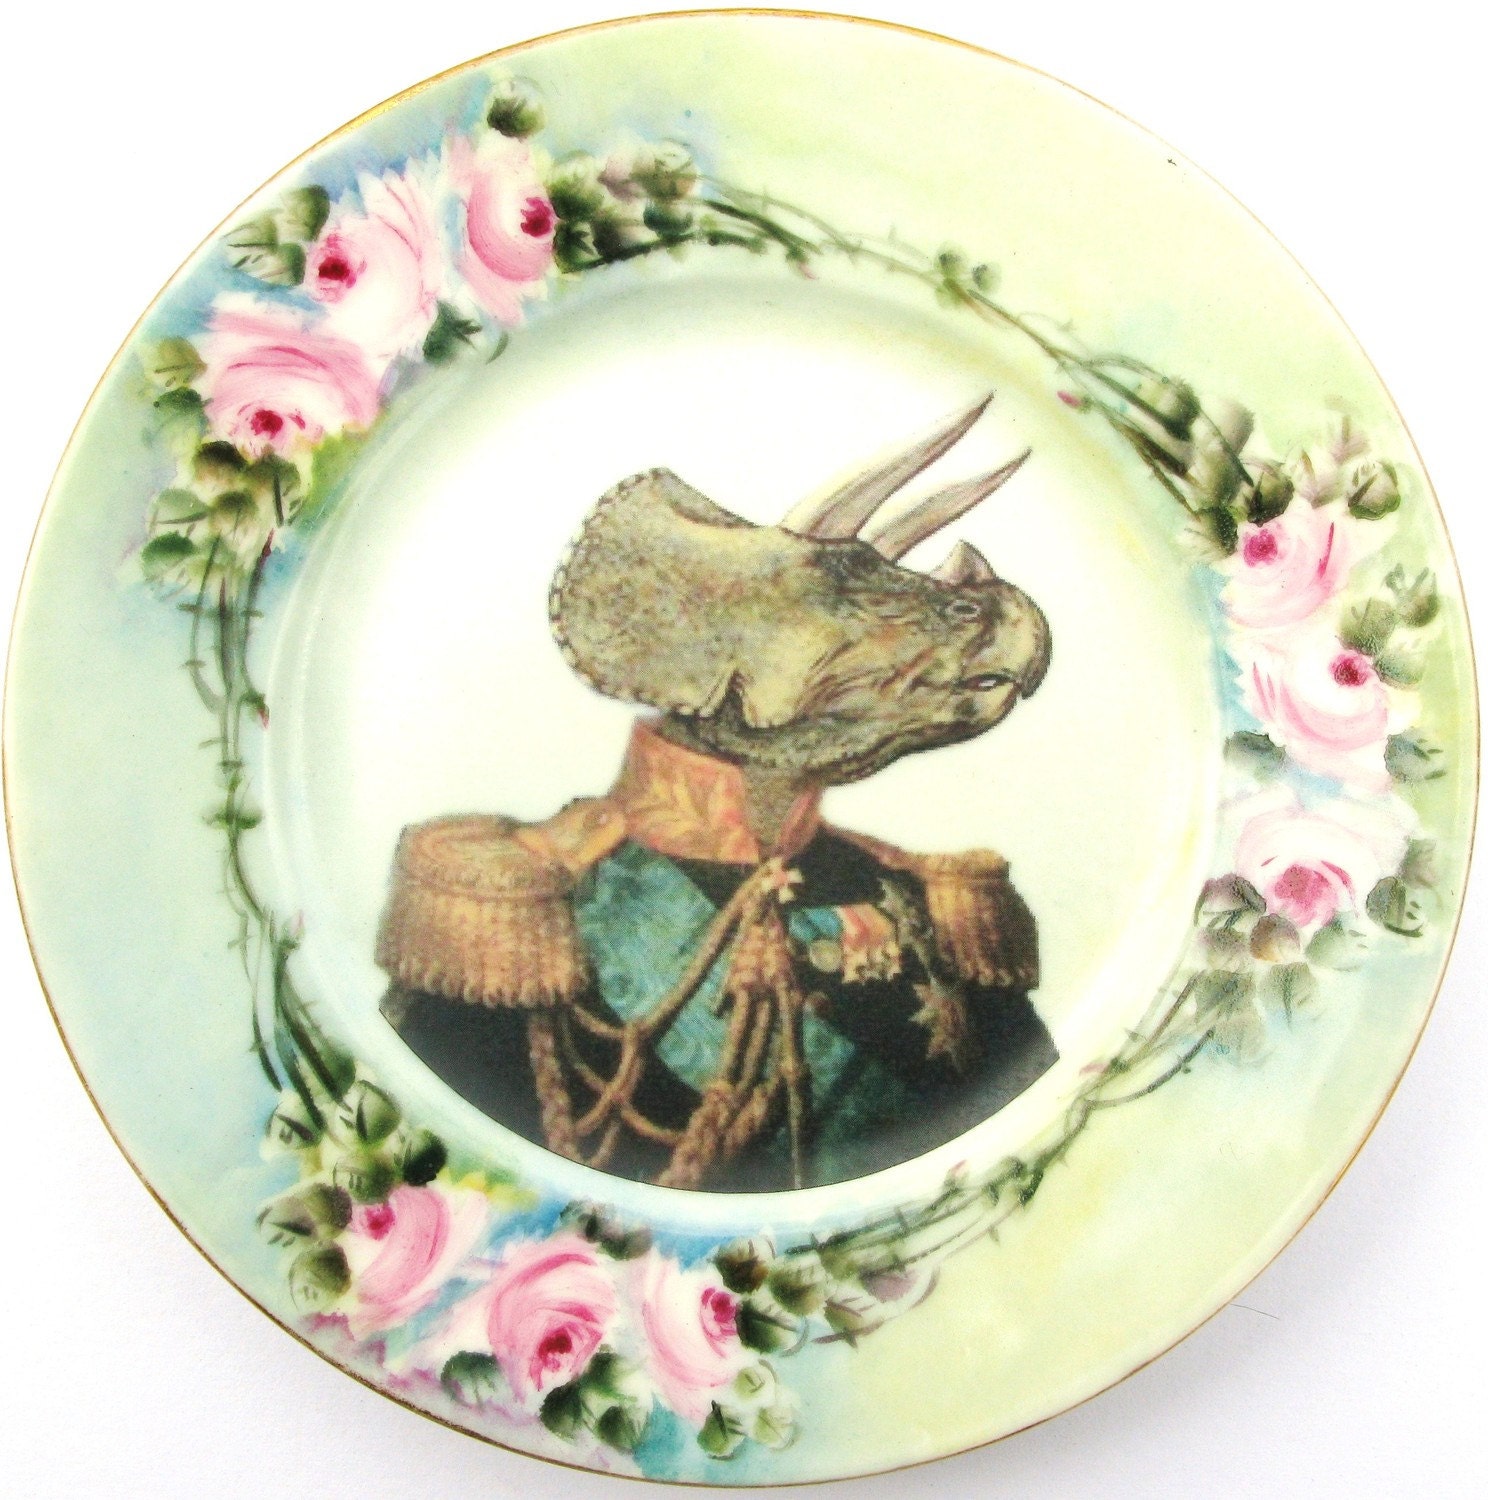 Admiral Triceratops Portrait Plate - Altered Antique Plate